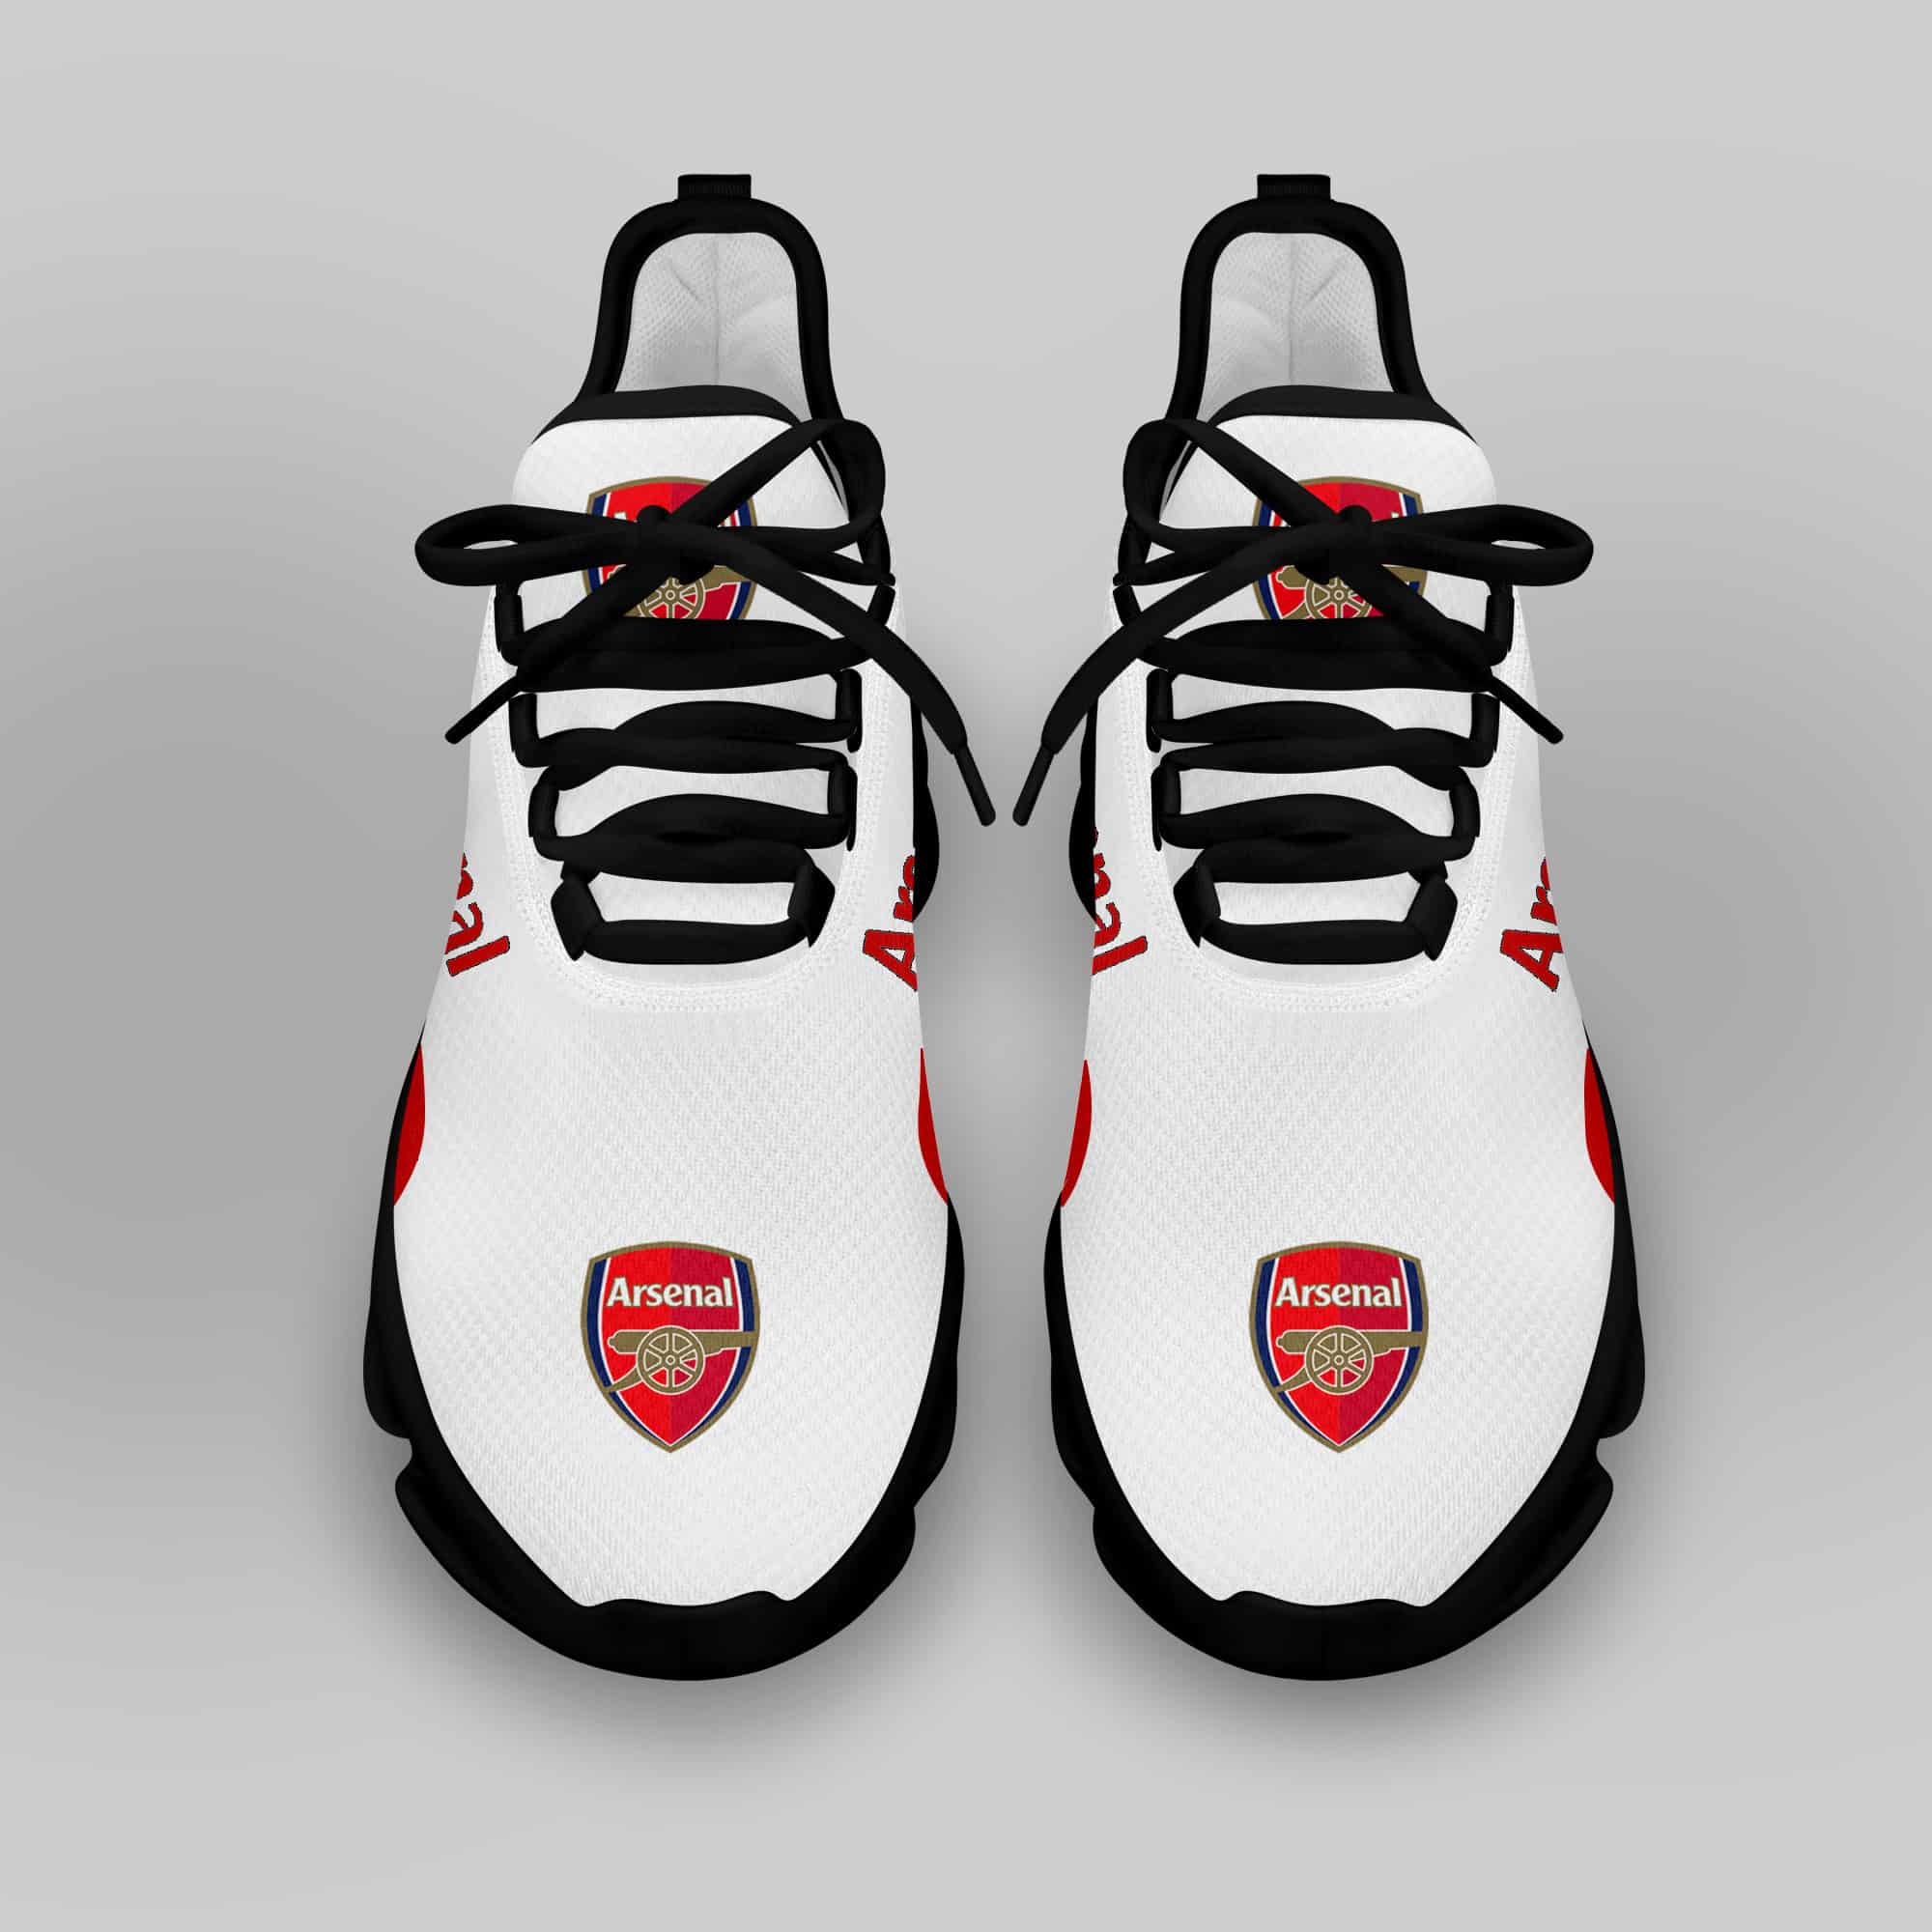 Arsenal Running Shoes Max Soul Shoes Sneakers Ver 2 4